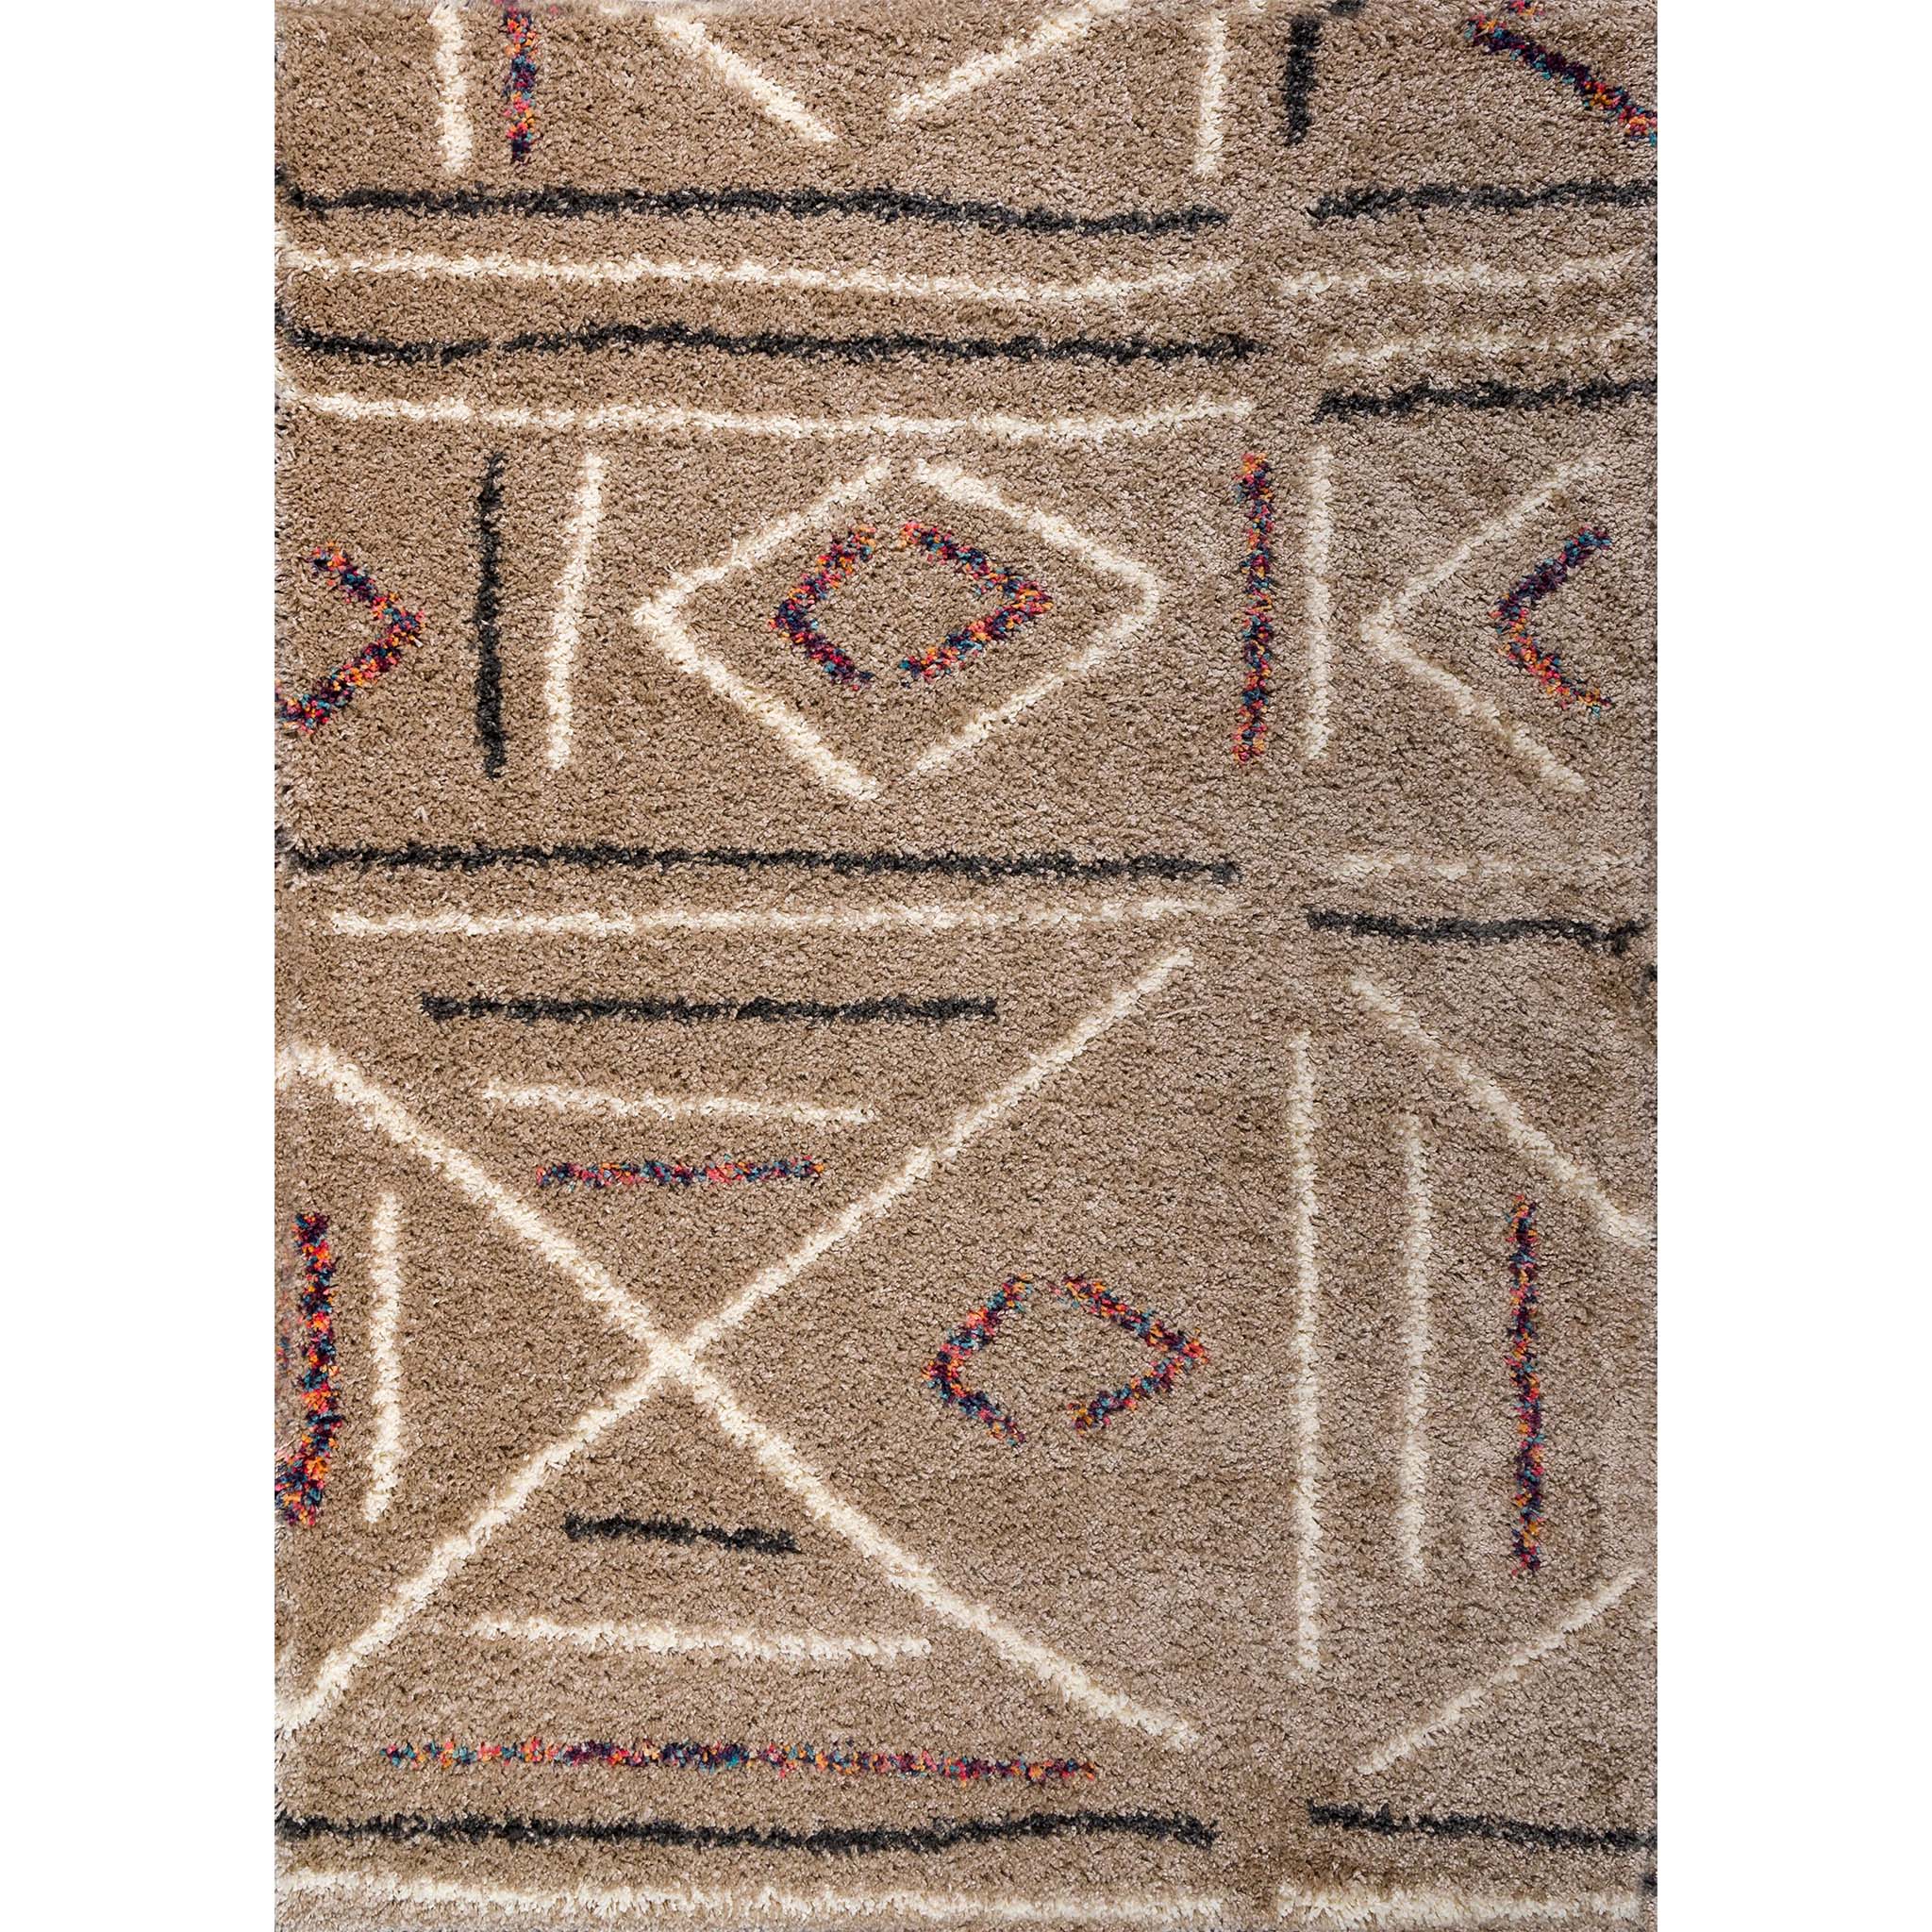 Cam Rugs CA - e-Factory Outlet